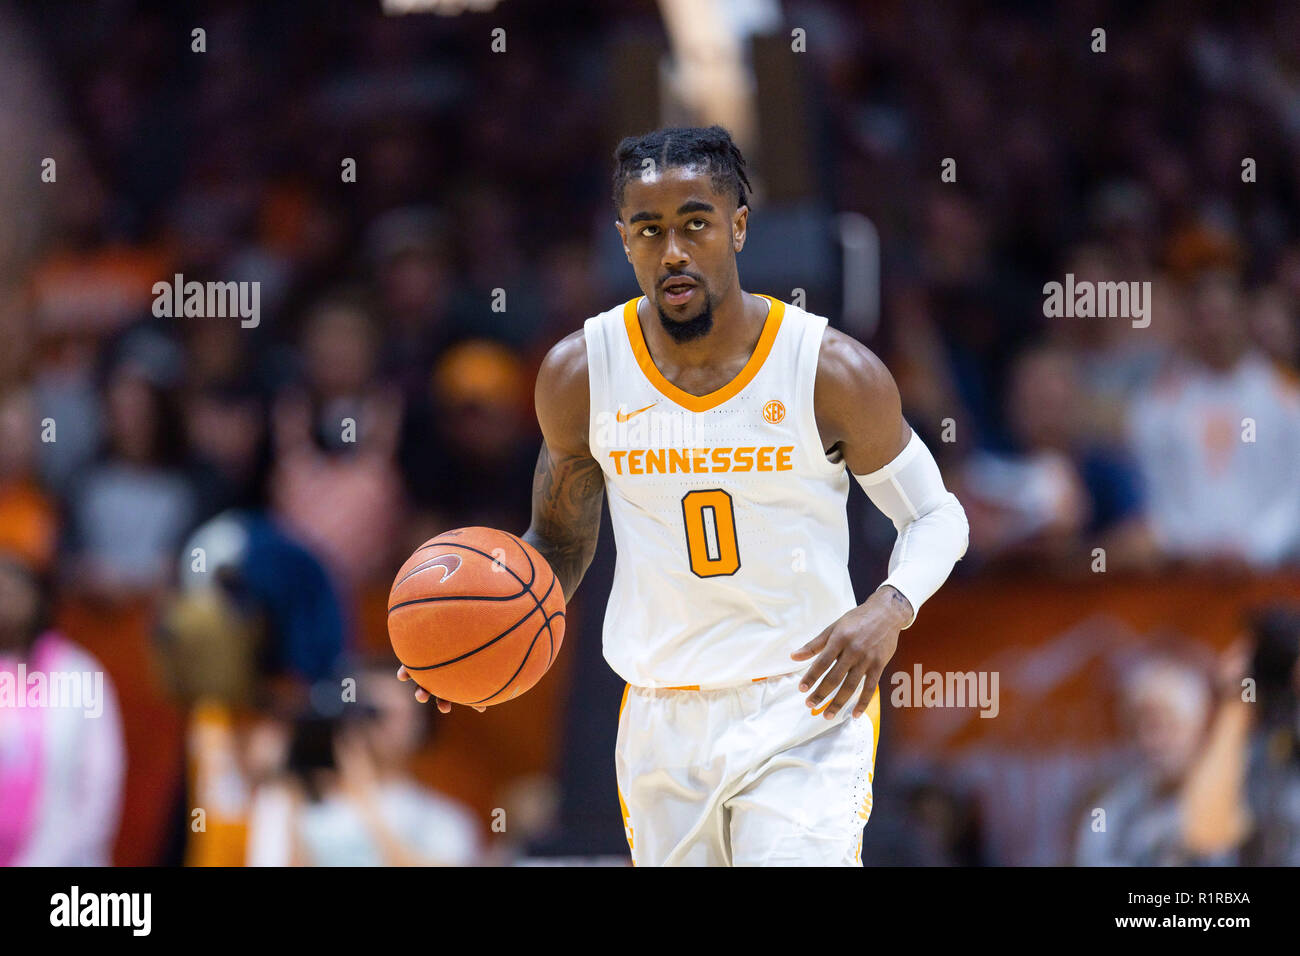 Knoxville, Tennessee, USA. 13th Nov, 2018. November 13, 2018: Jordan Bone  #0 of the Tennessee Volunteers brings the ball up court during the NCAA  basketball game between the University of Tennessee Volunteers